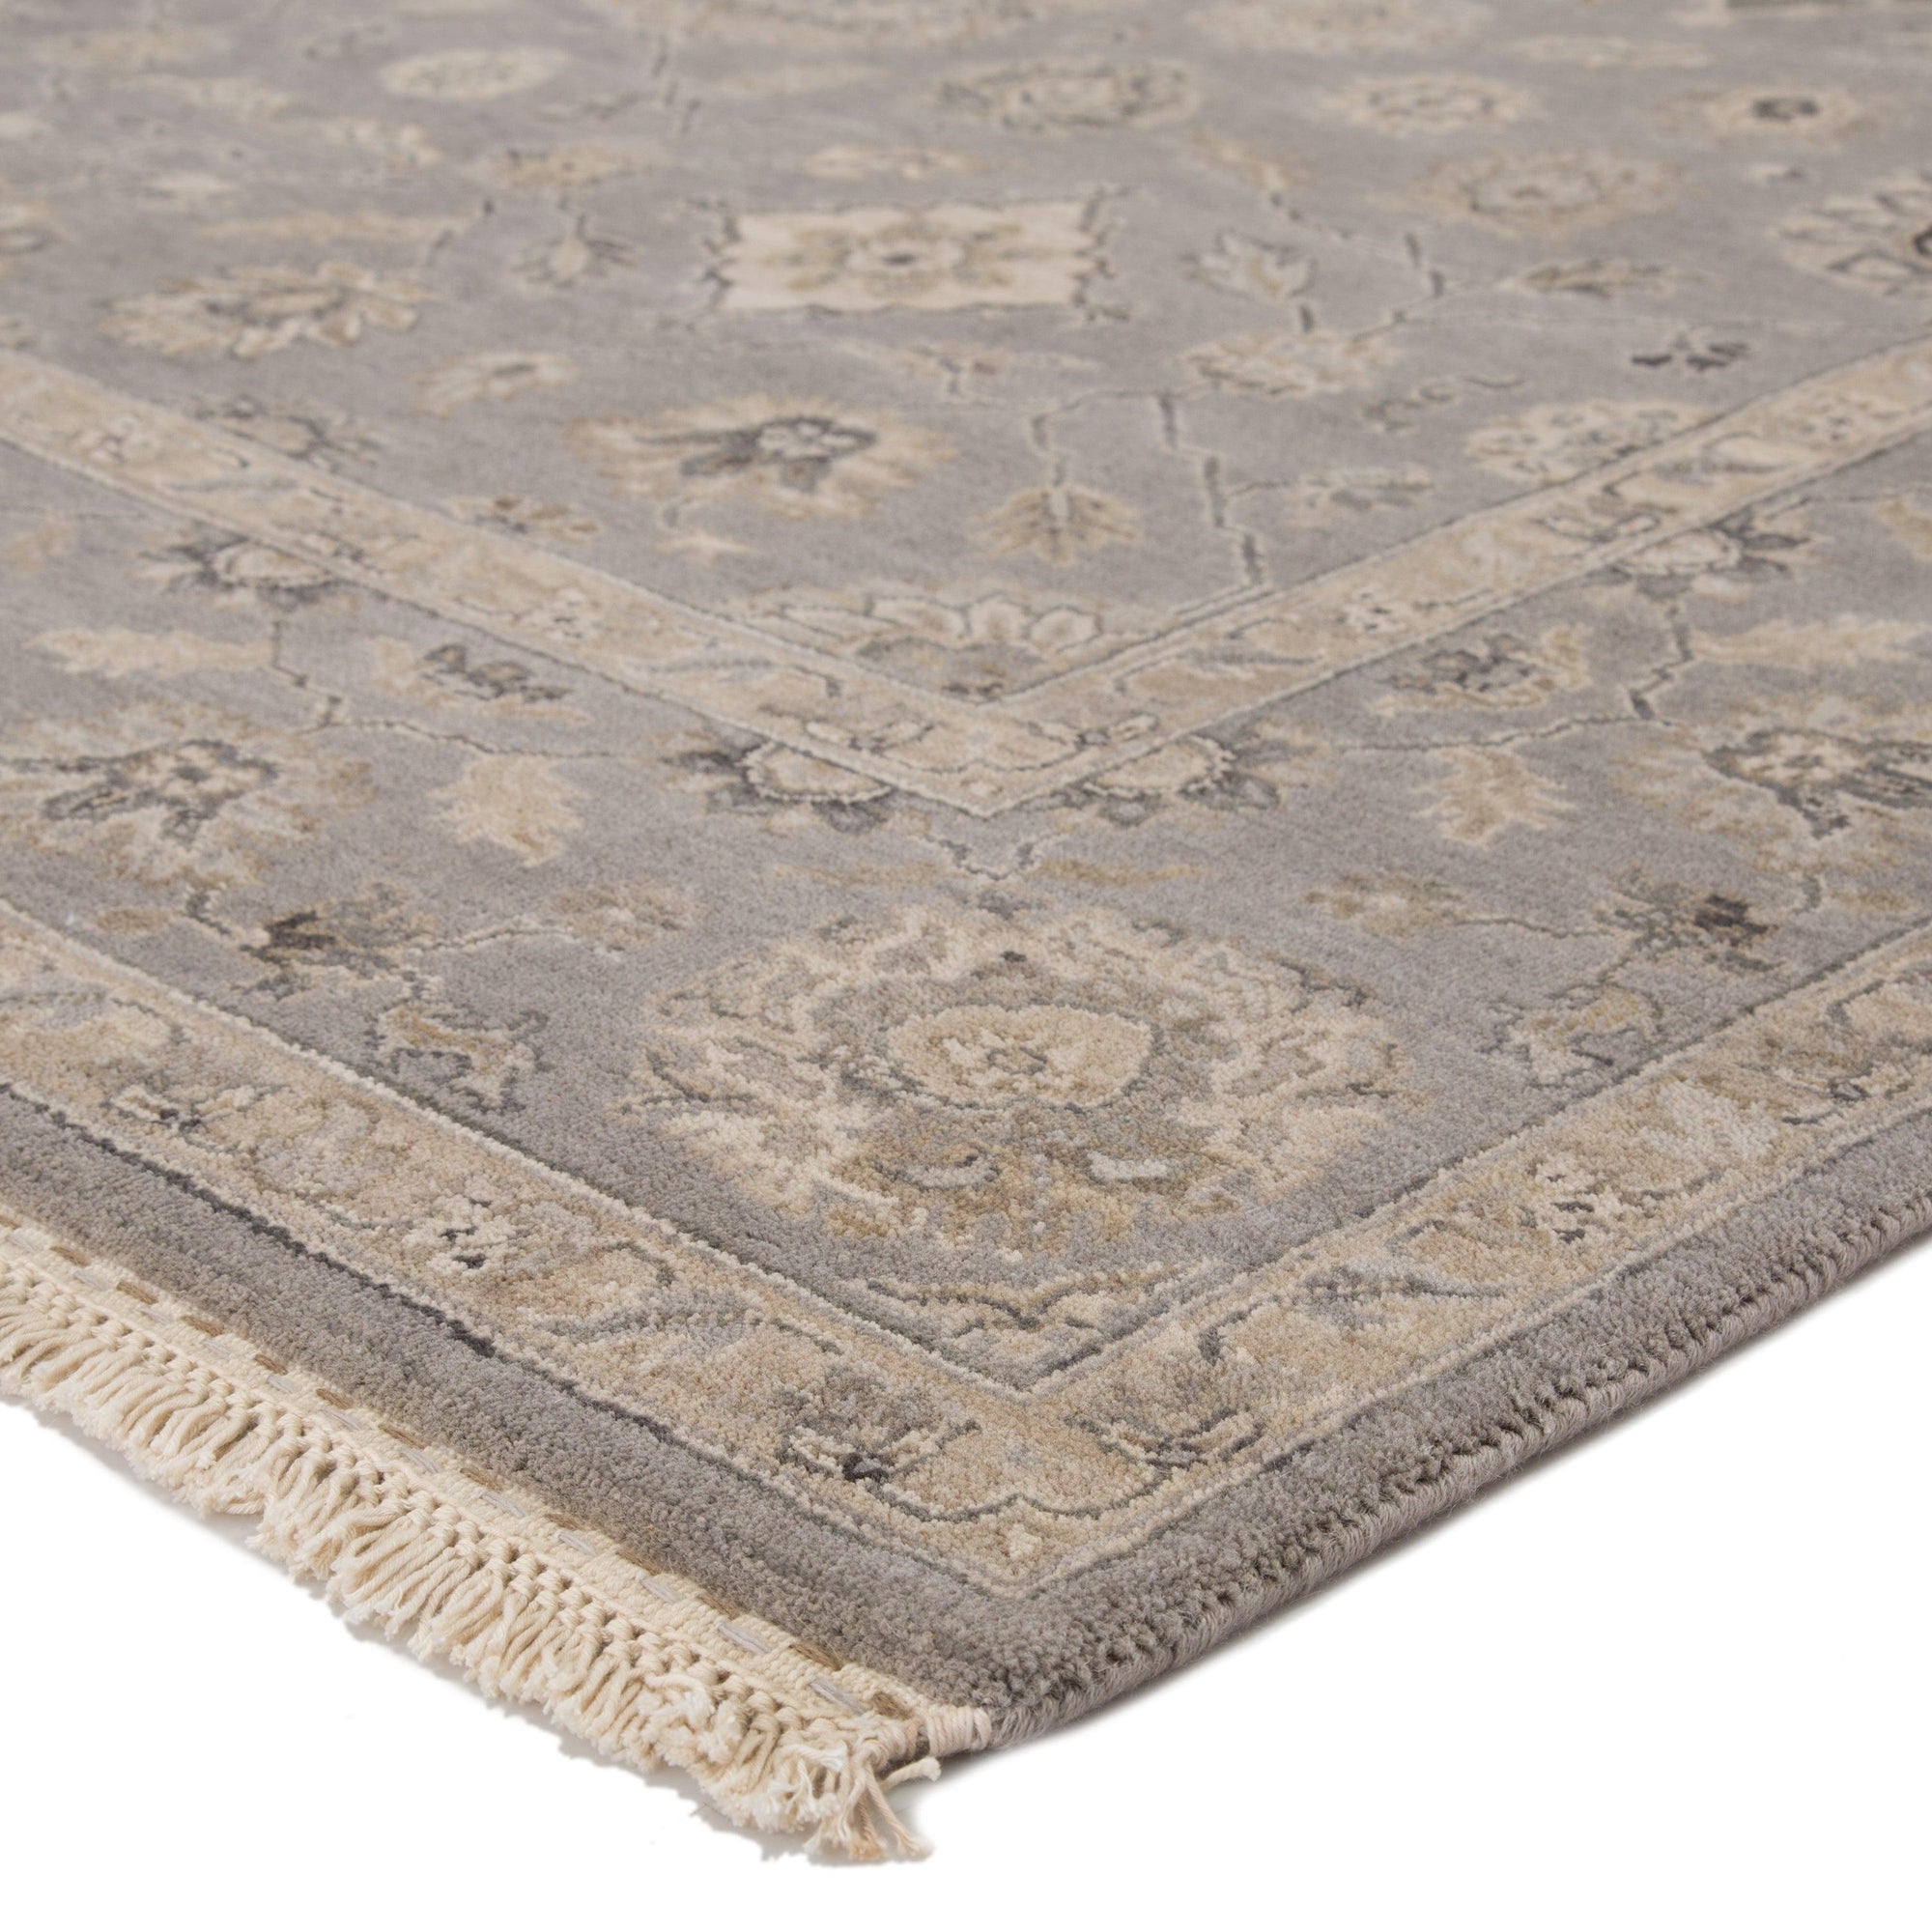 Rugs by Roo | Jaipur Living Riverton Hand-Knotted Medallion Gray Tan Area Rug-RUG133647